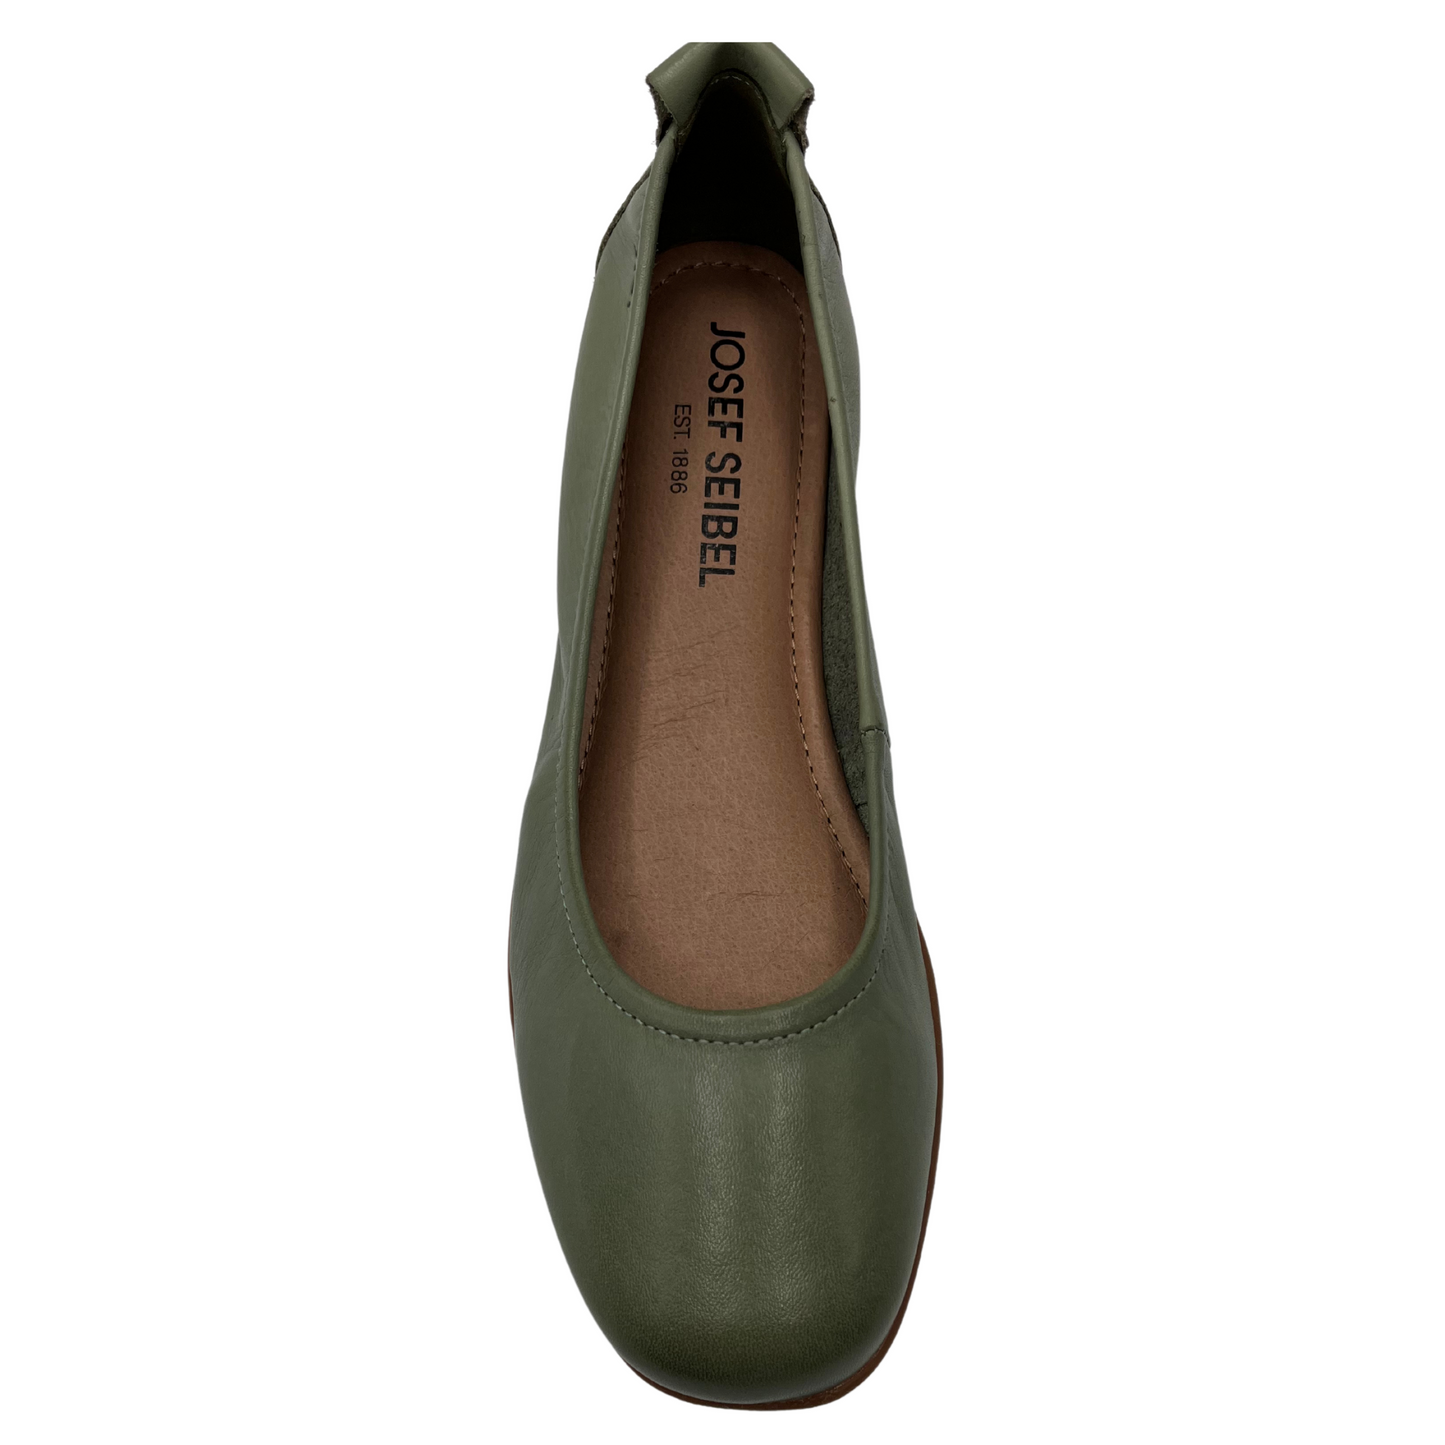 Top view of mint leather ballet flat with rounded toe and leather lining